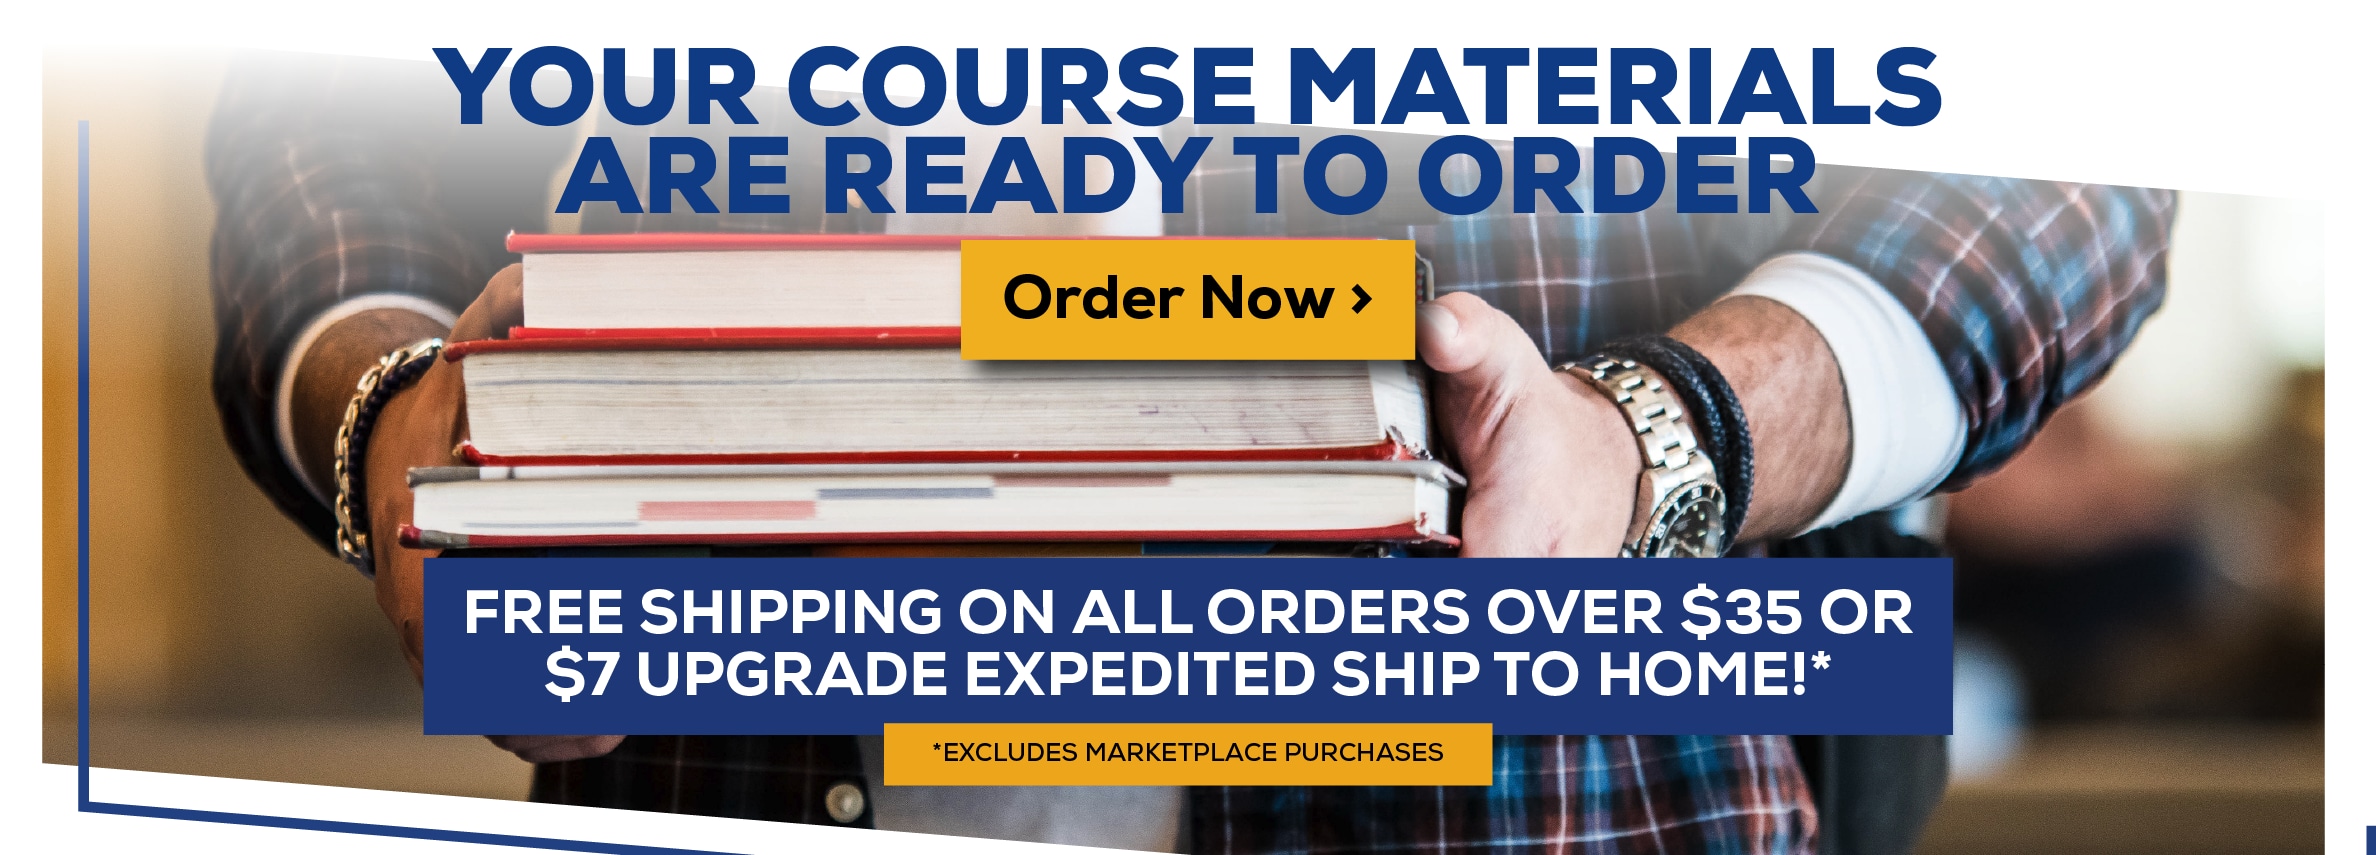 Your Course Materials are Ready to Order. Order Now. Free shipping on orders over $35 or $7 upgrade expedited ship to home! *Excludes marketplace purchases.